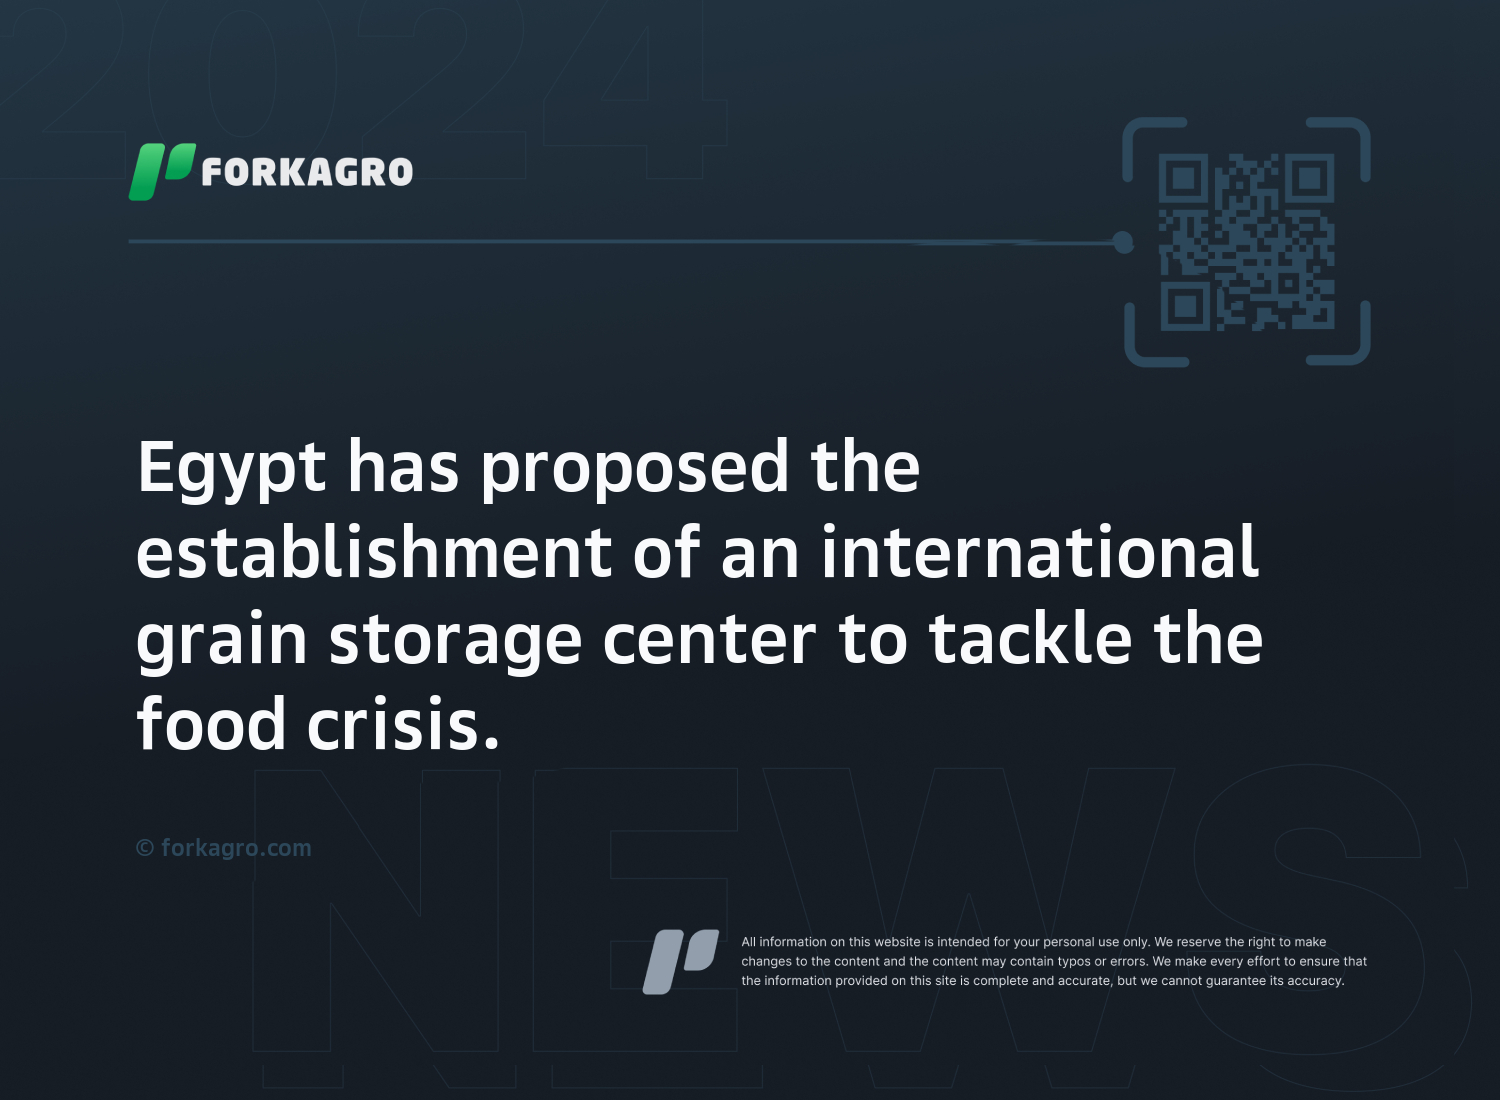 Egypt has proposed the establishment of an international grain storage center to tackle the food crisis.